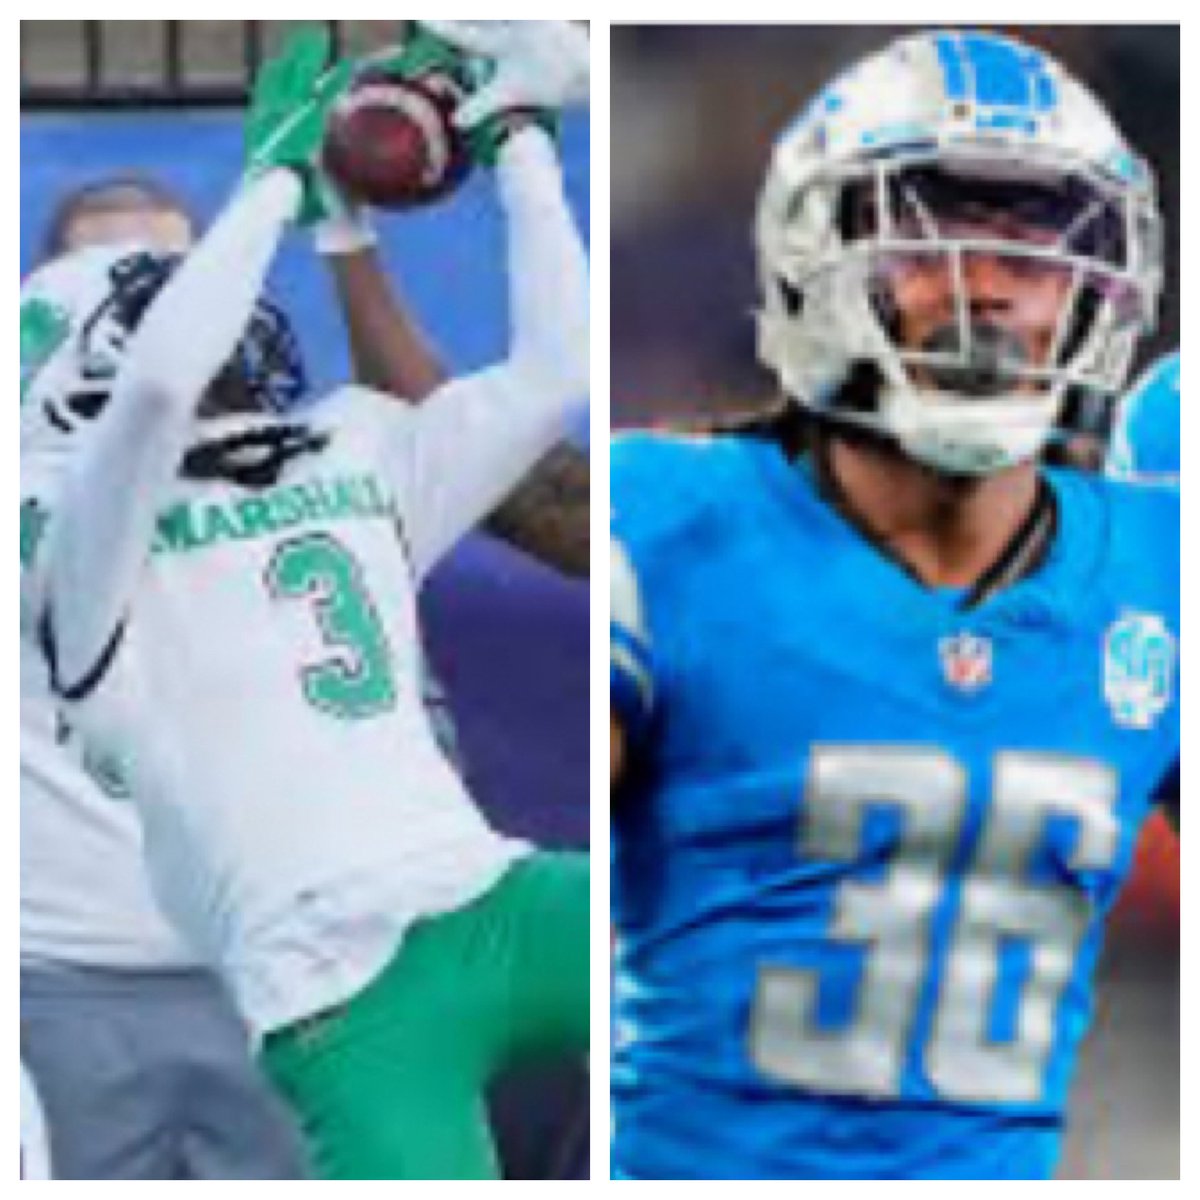 Congratulations to former @HerdFB DB @toofyegilmore (2018-2022) and @Lions on making the @NFL playoffs. Exceptional player and young man with a very bright future!! #HerdFamily #OneHerd #HerdBrotherhood